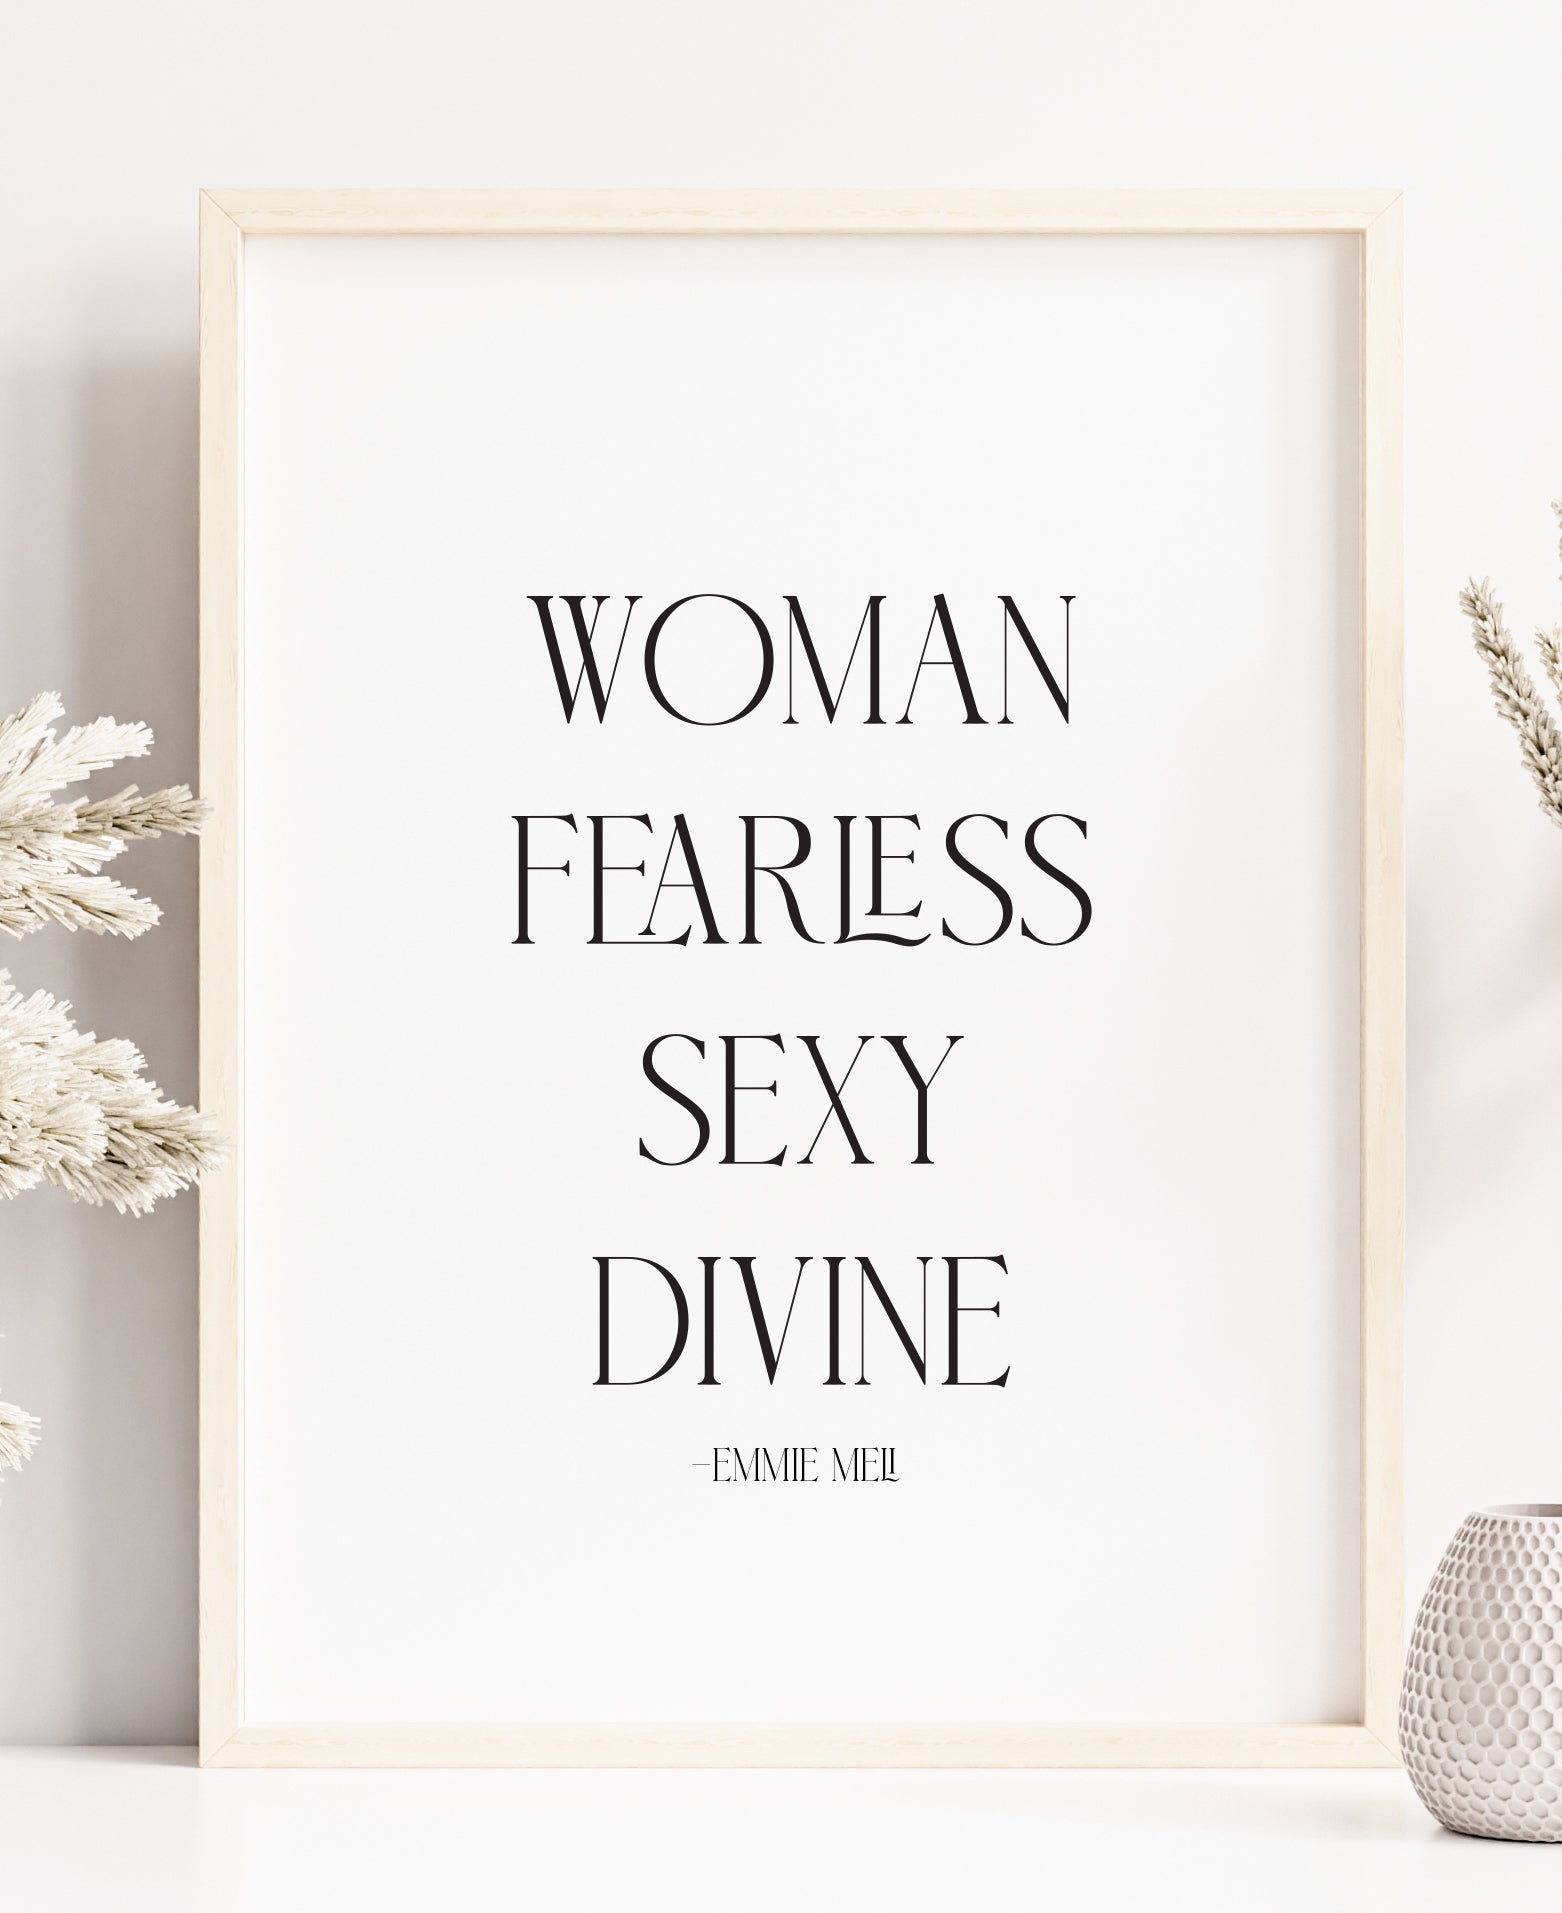 Woman Fearless Sexy Divine 8x10 Print